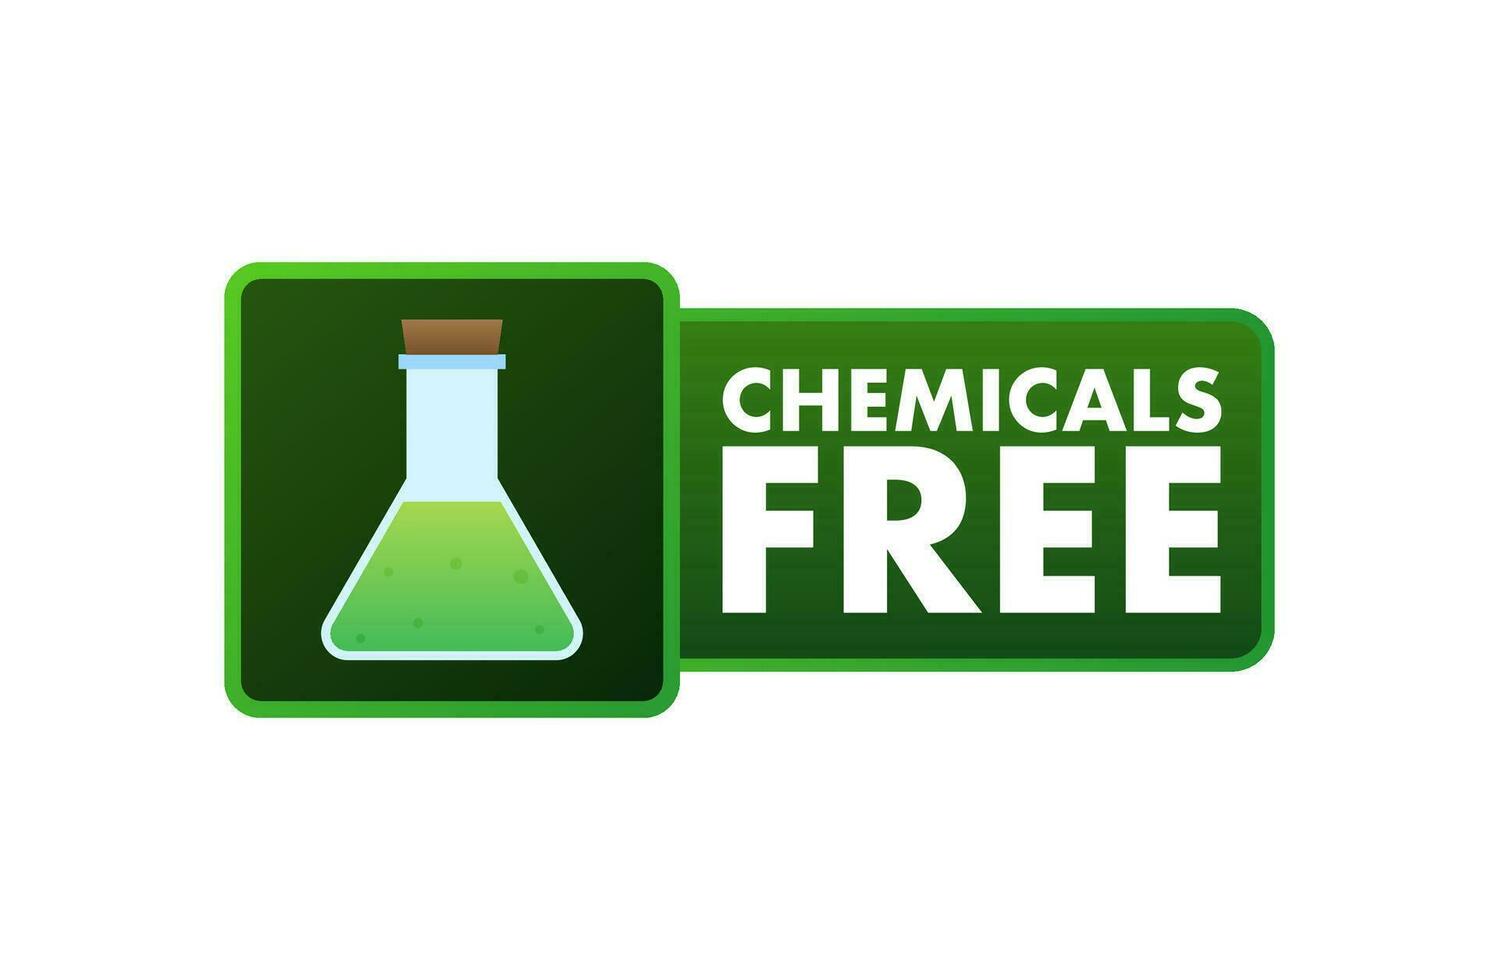 Green vector icon. Chemicals free on white background.